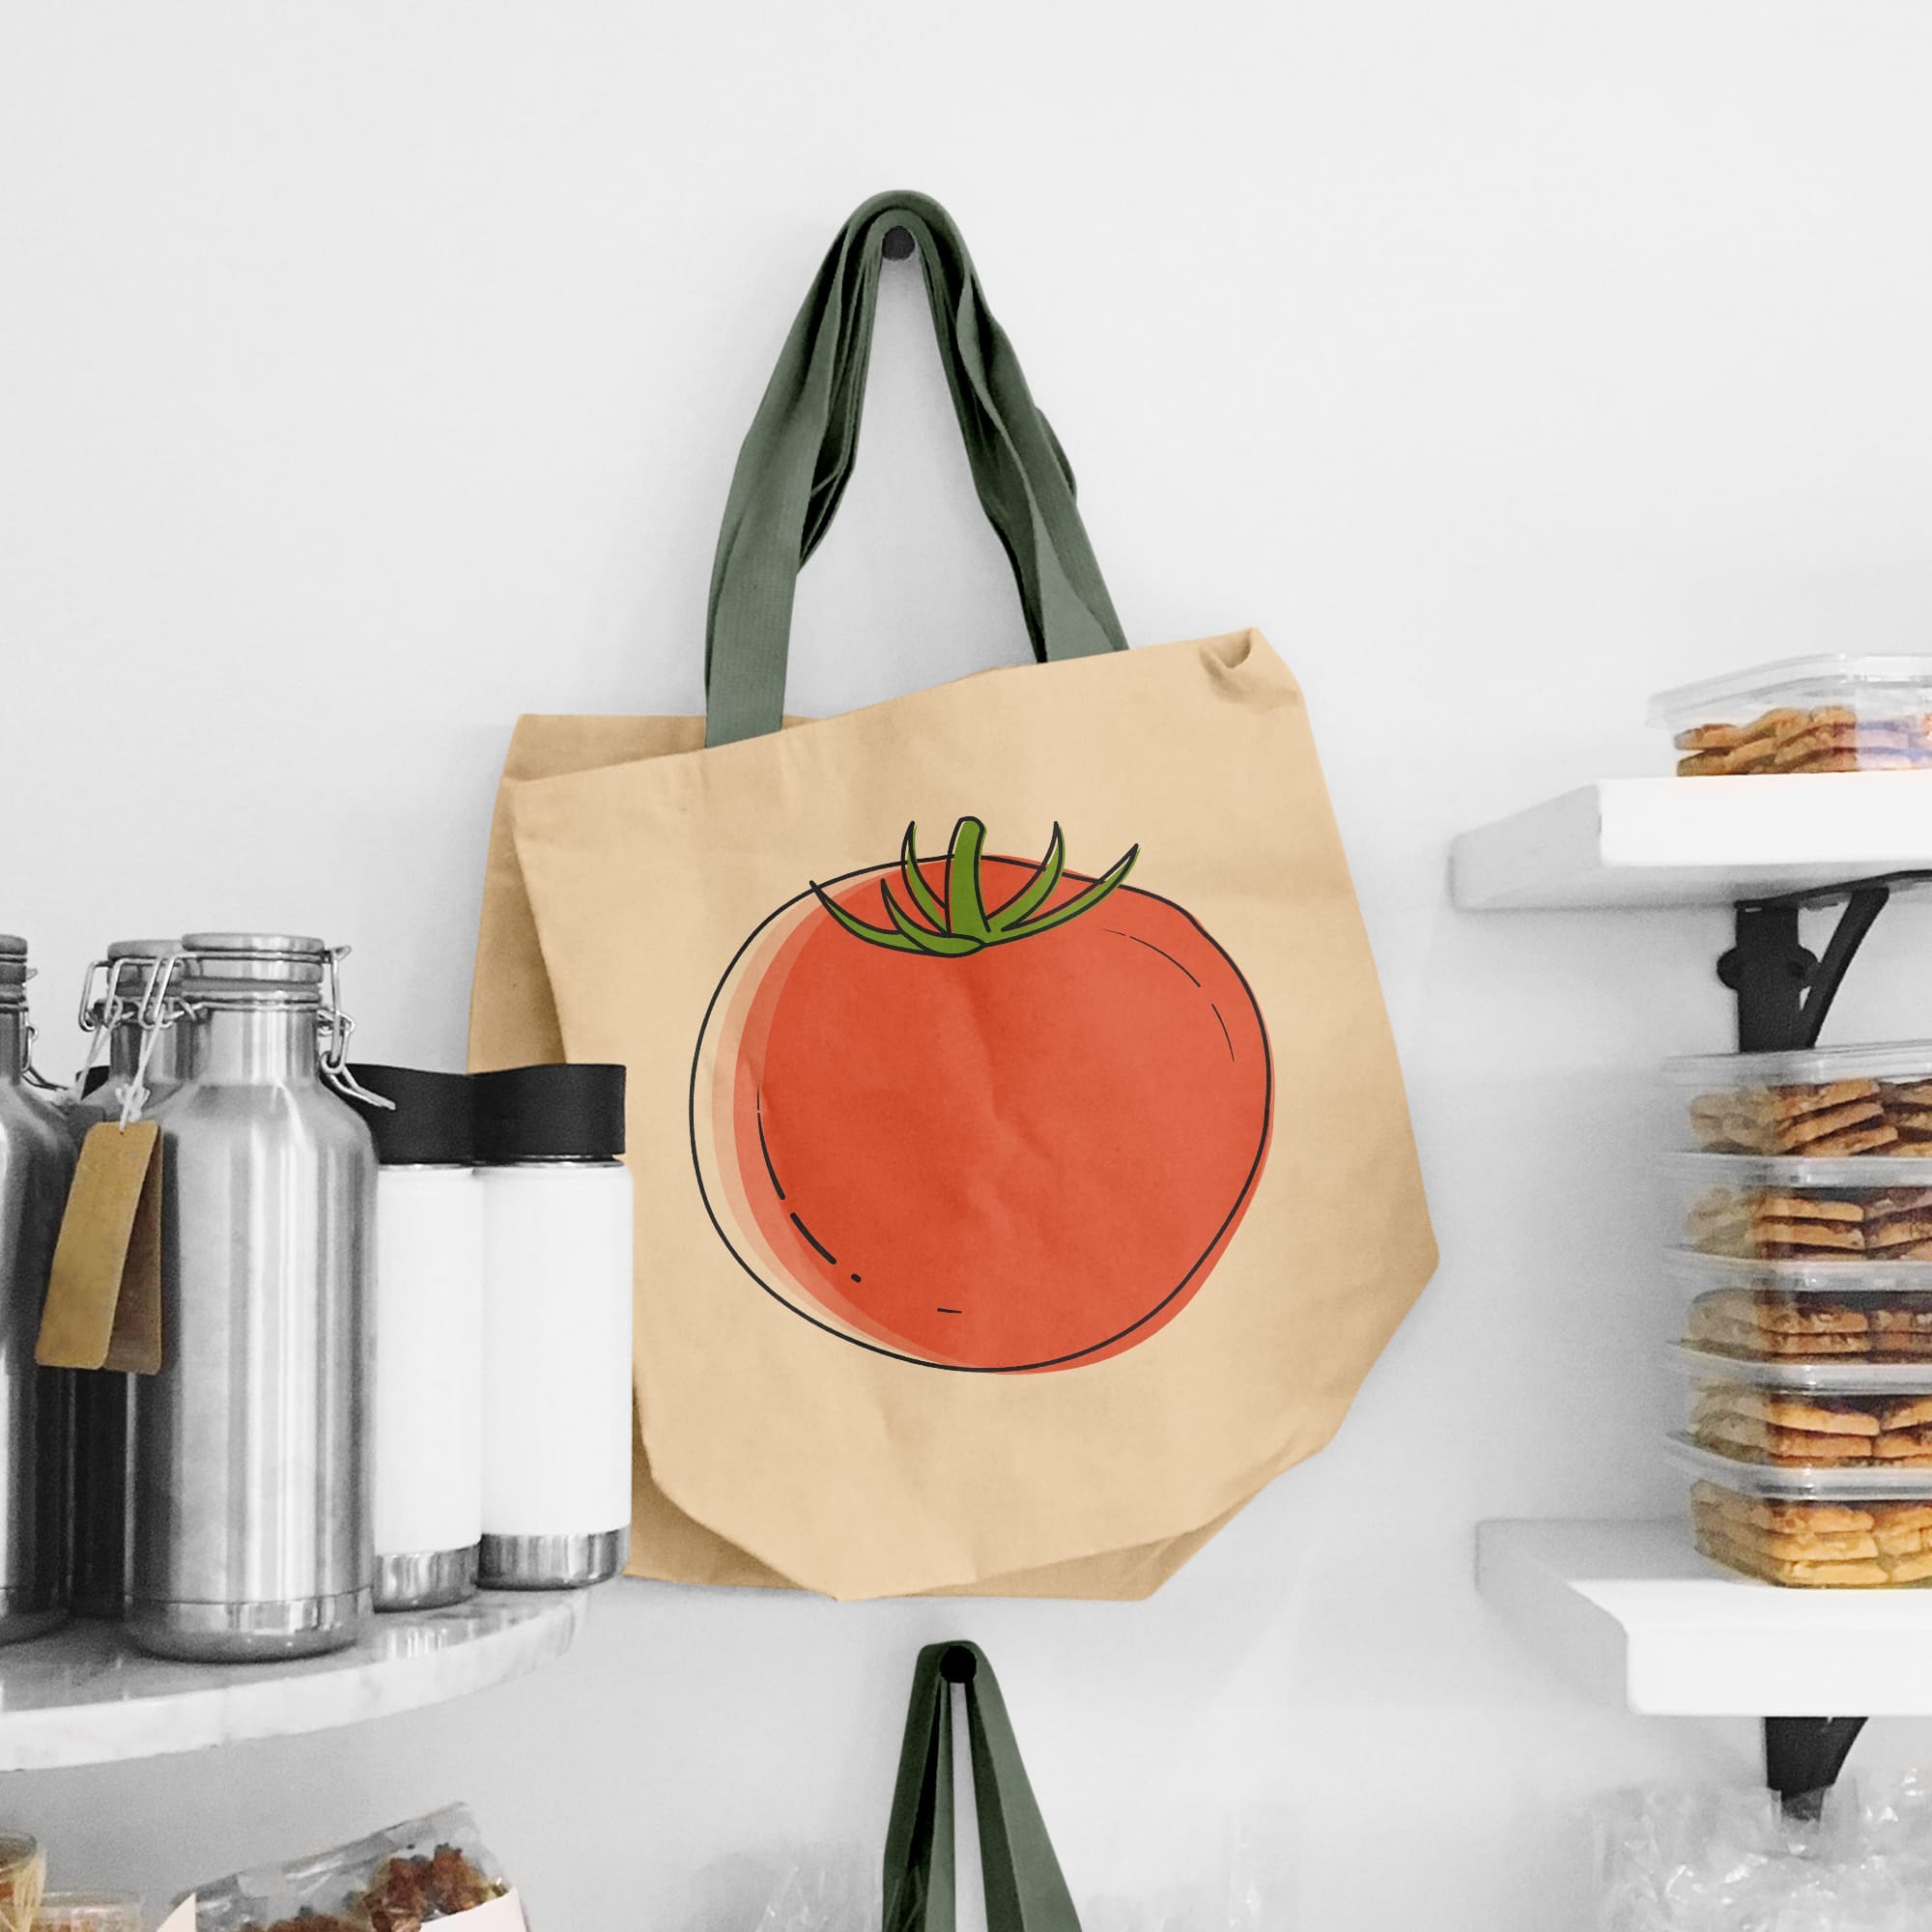 A red tomato is drawn on a grocery bag.